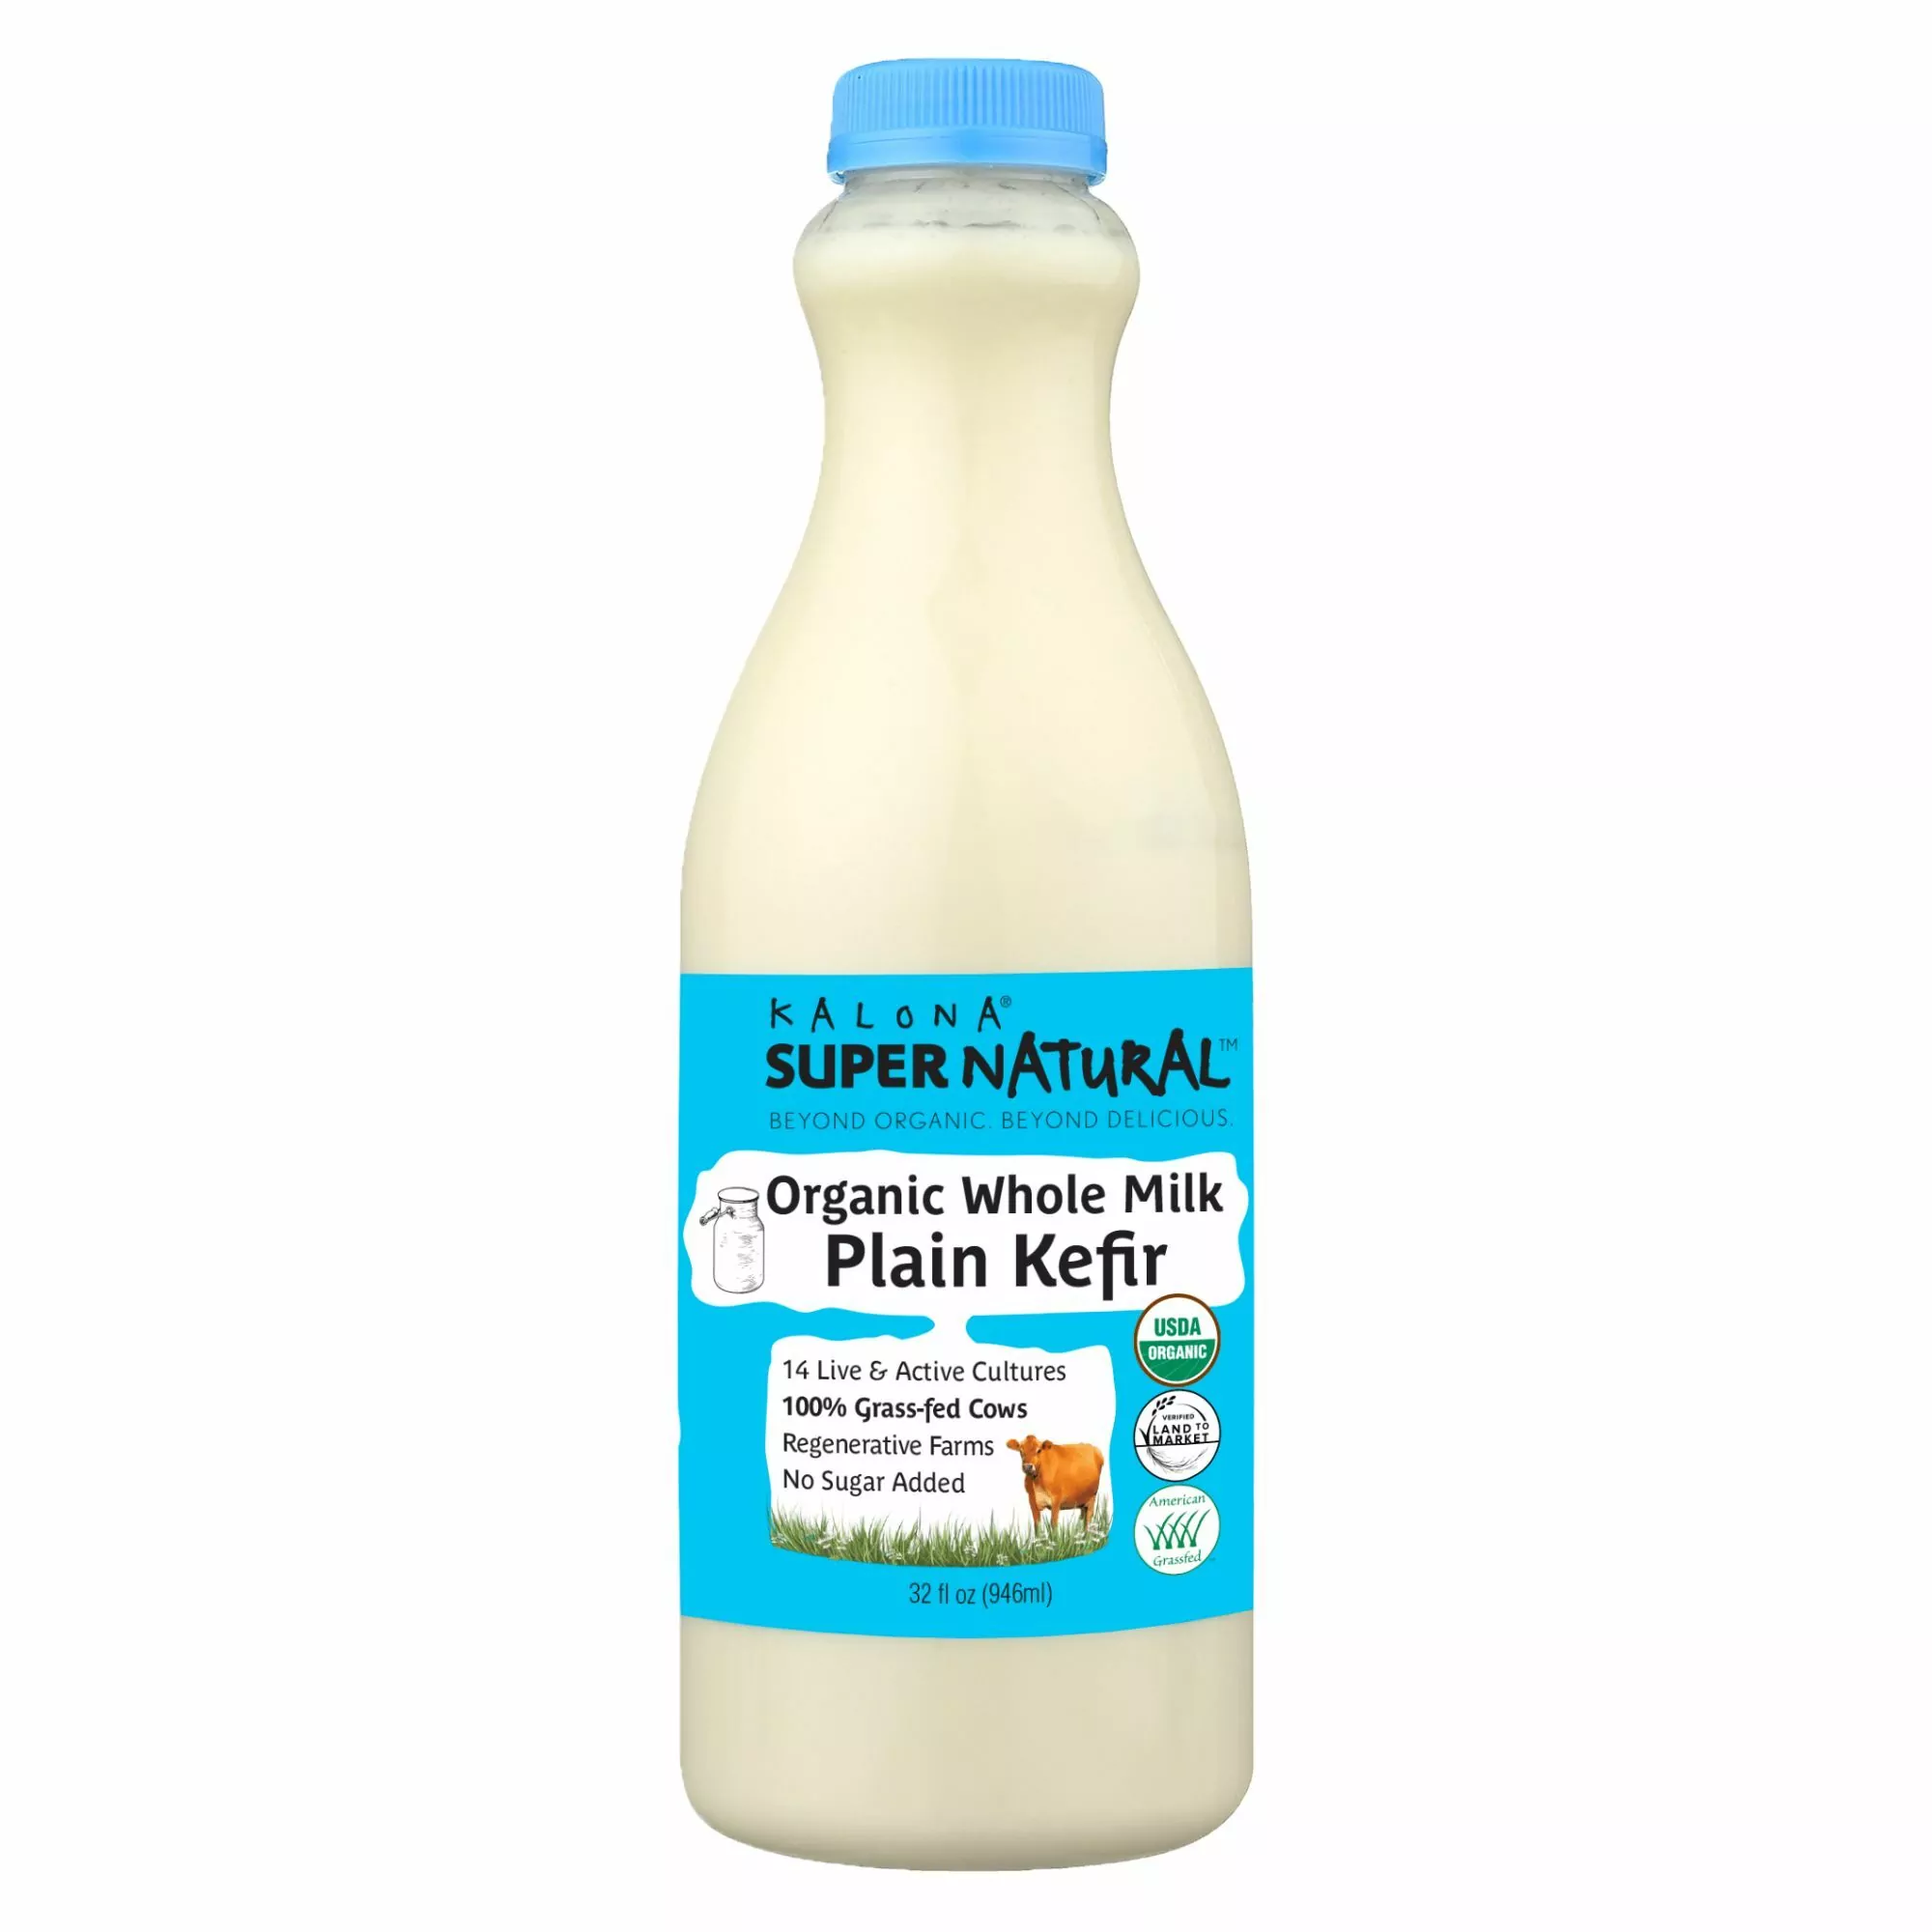 Natural Cows Milk at Whole Foods Market